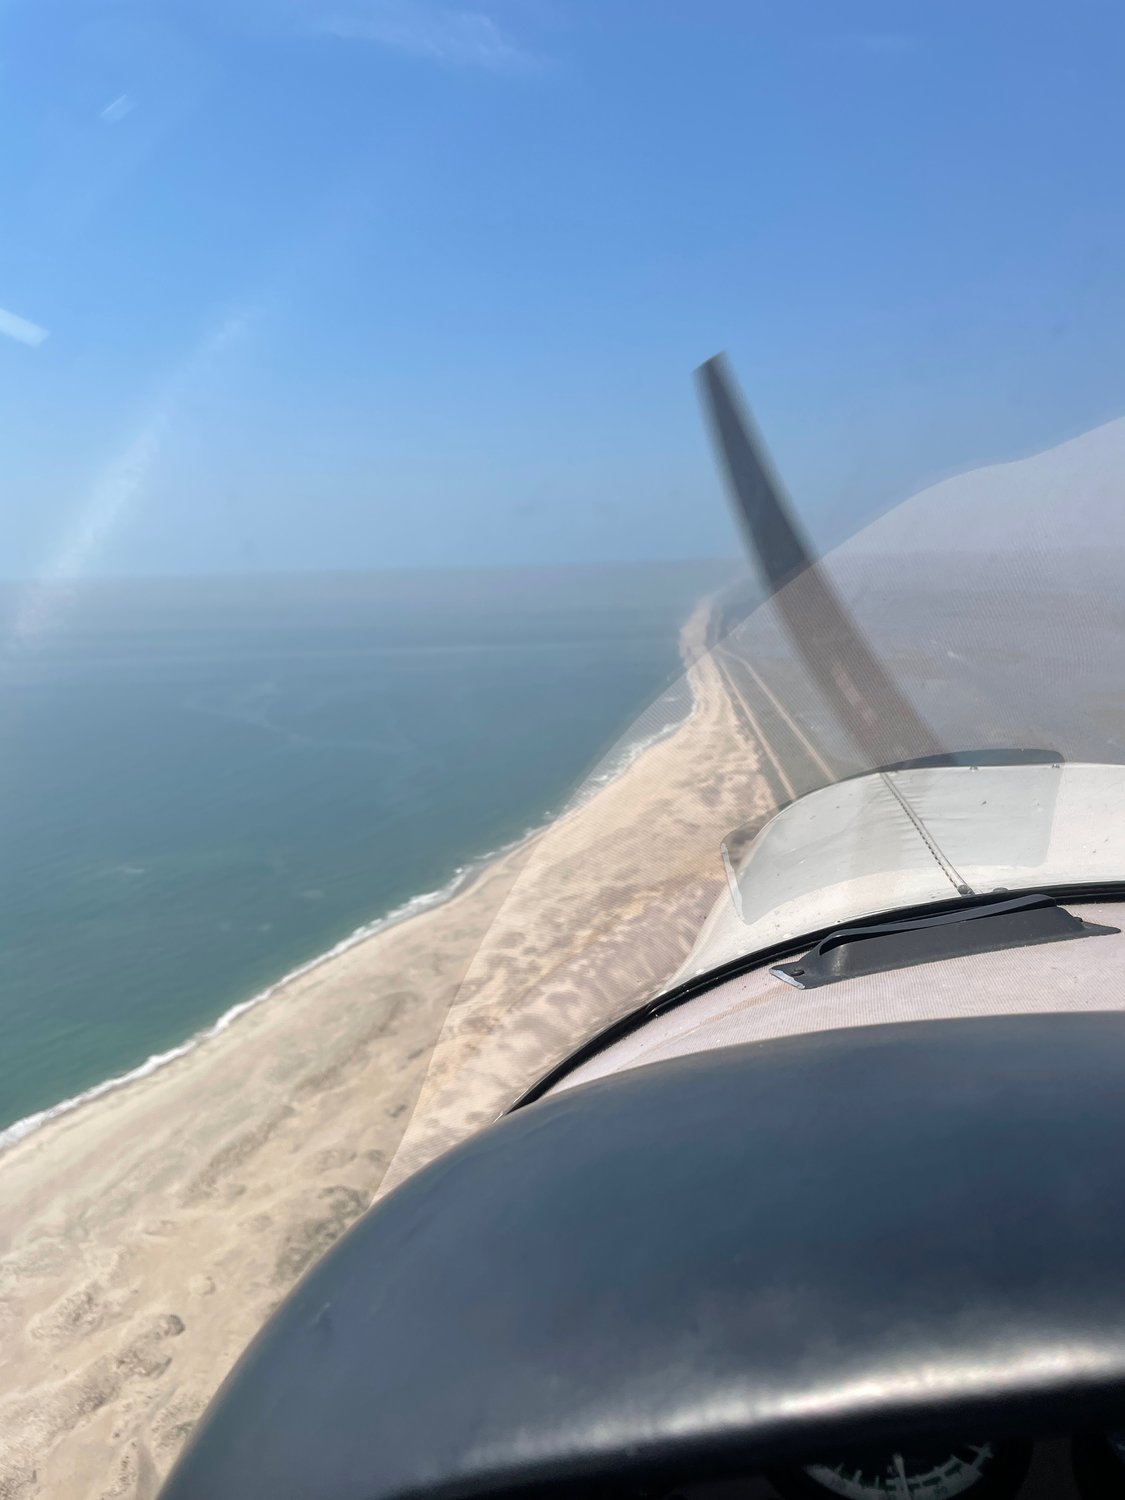 A view from above: Barsallo flies single-engine, two- or four-seat planes, typically staying within the Long Island region as he continues to learn.